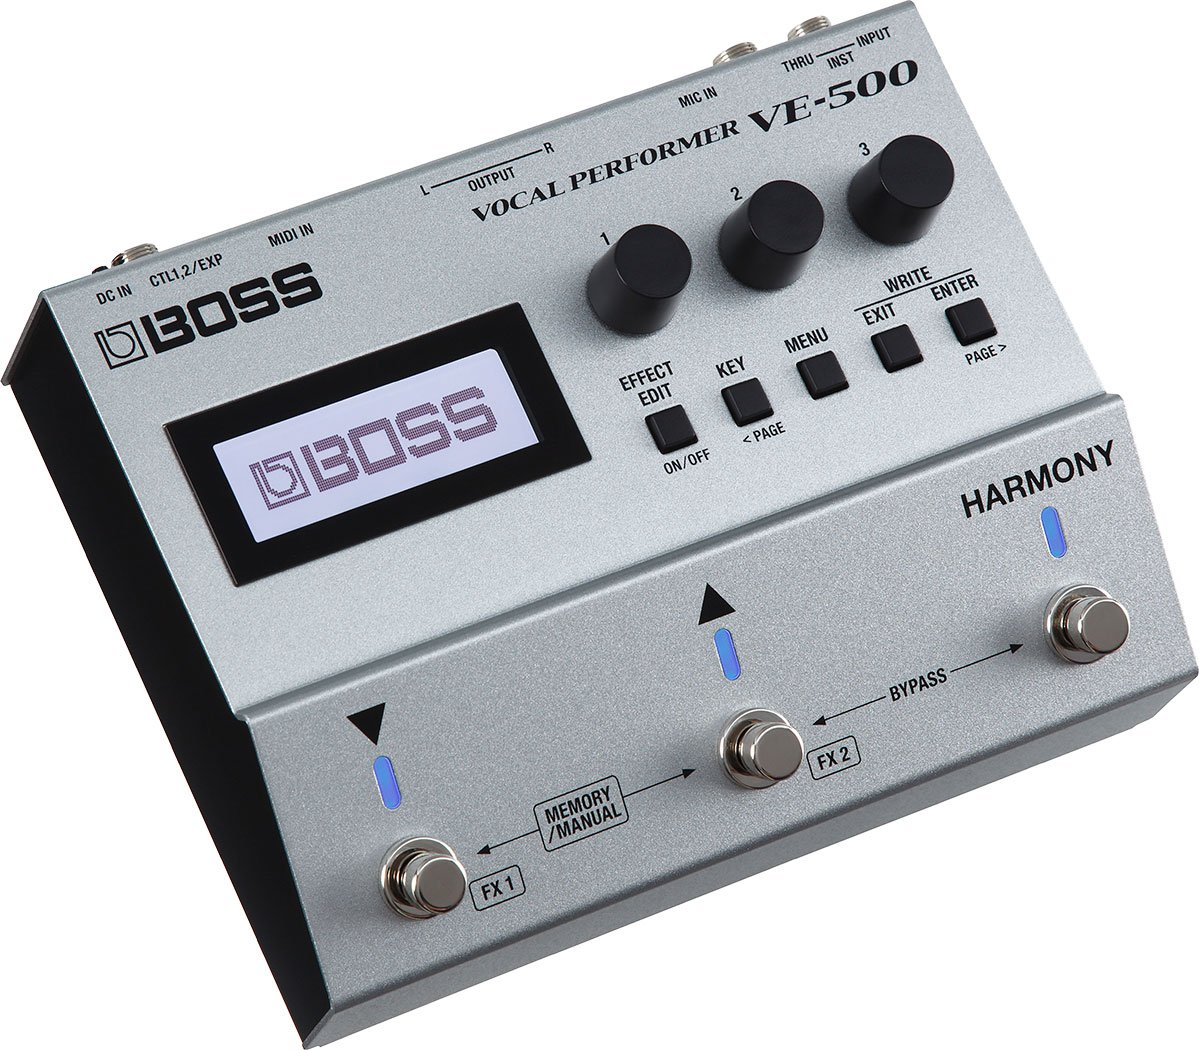 lotus vervagen textuur Boss VE-500 Vocal Performer 32-bit Multi-FX, Looper, And Vocal Harmonizer  Pedal | Full Compass Systems